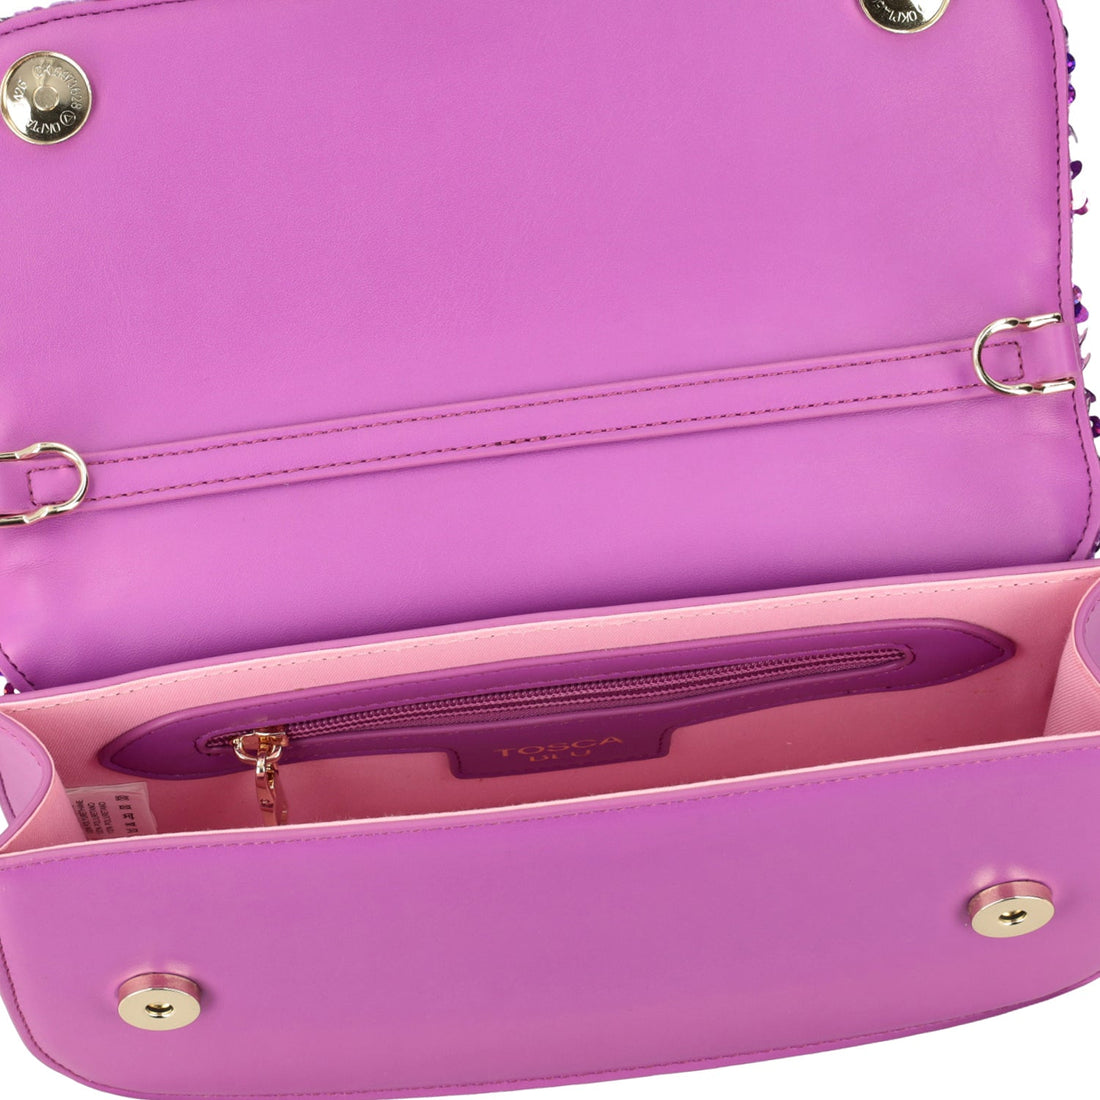 PURPLE COSMOPOLITAN SHOULDER BAG EMBROIDERED WITH PEARL